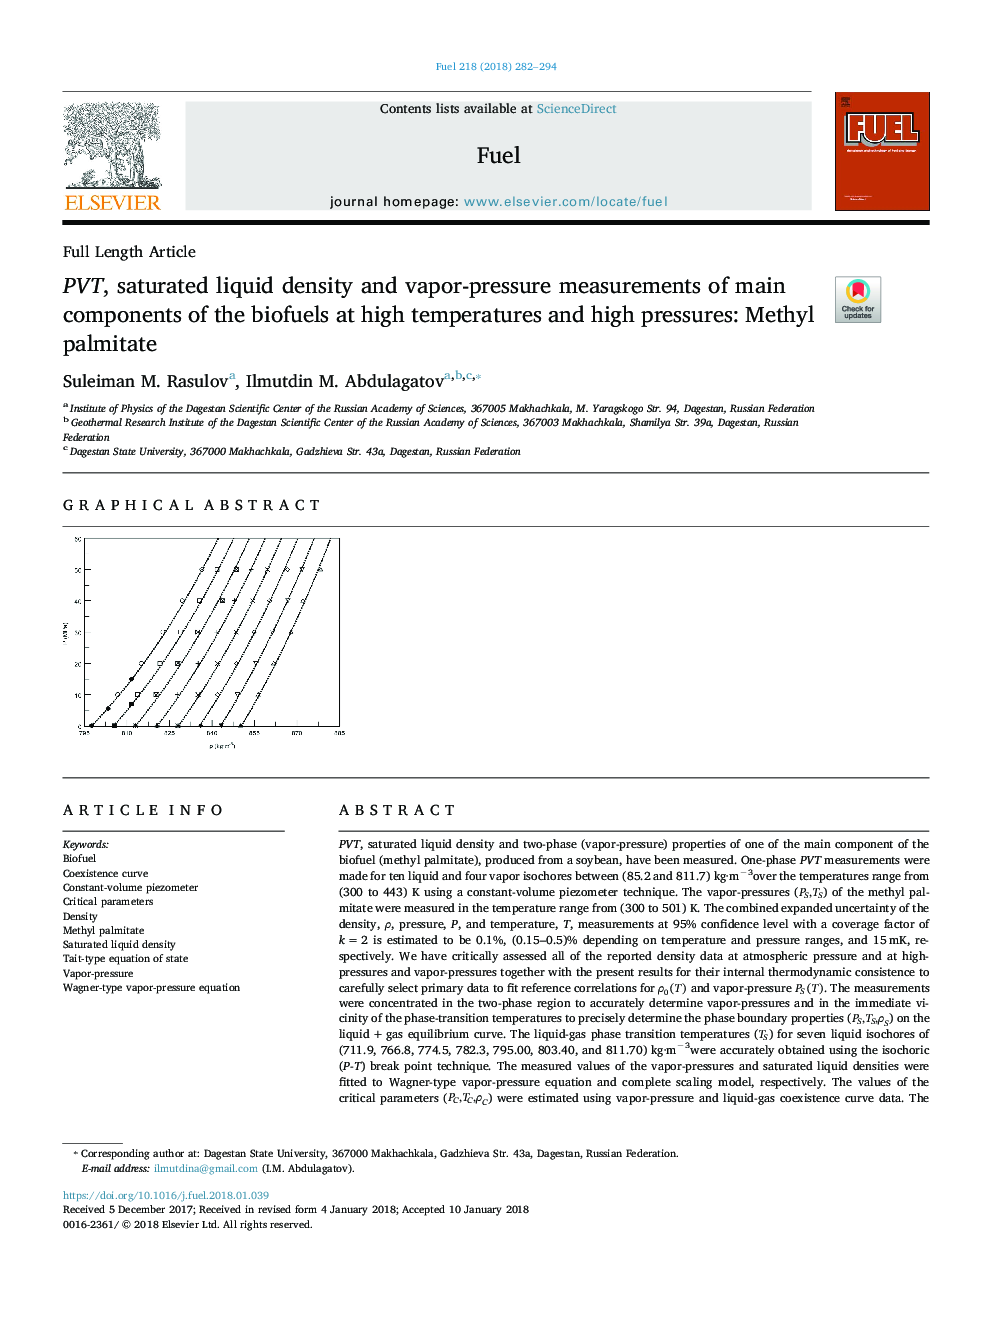 PVT, saturated liquid density and vapor-pressure measurements of main components of the biofuels at high temperatures and high pressures: Methyl palmitate